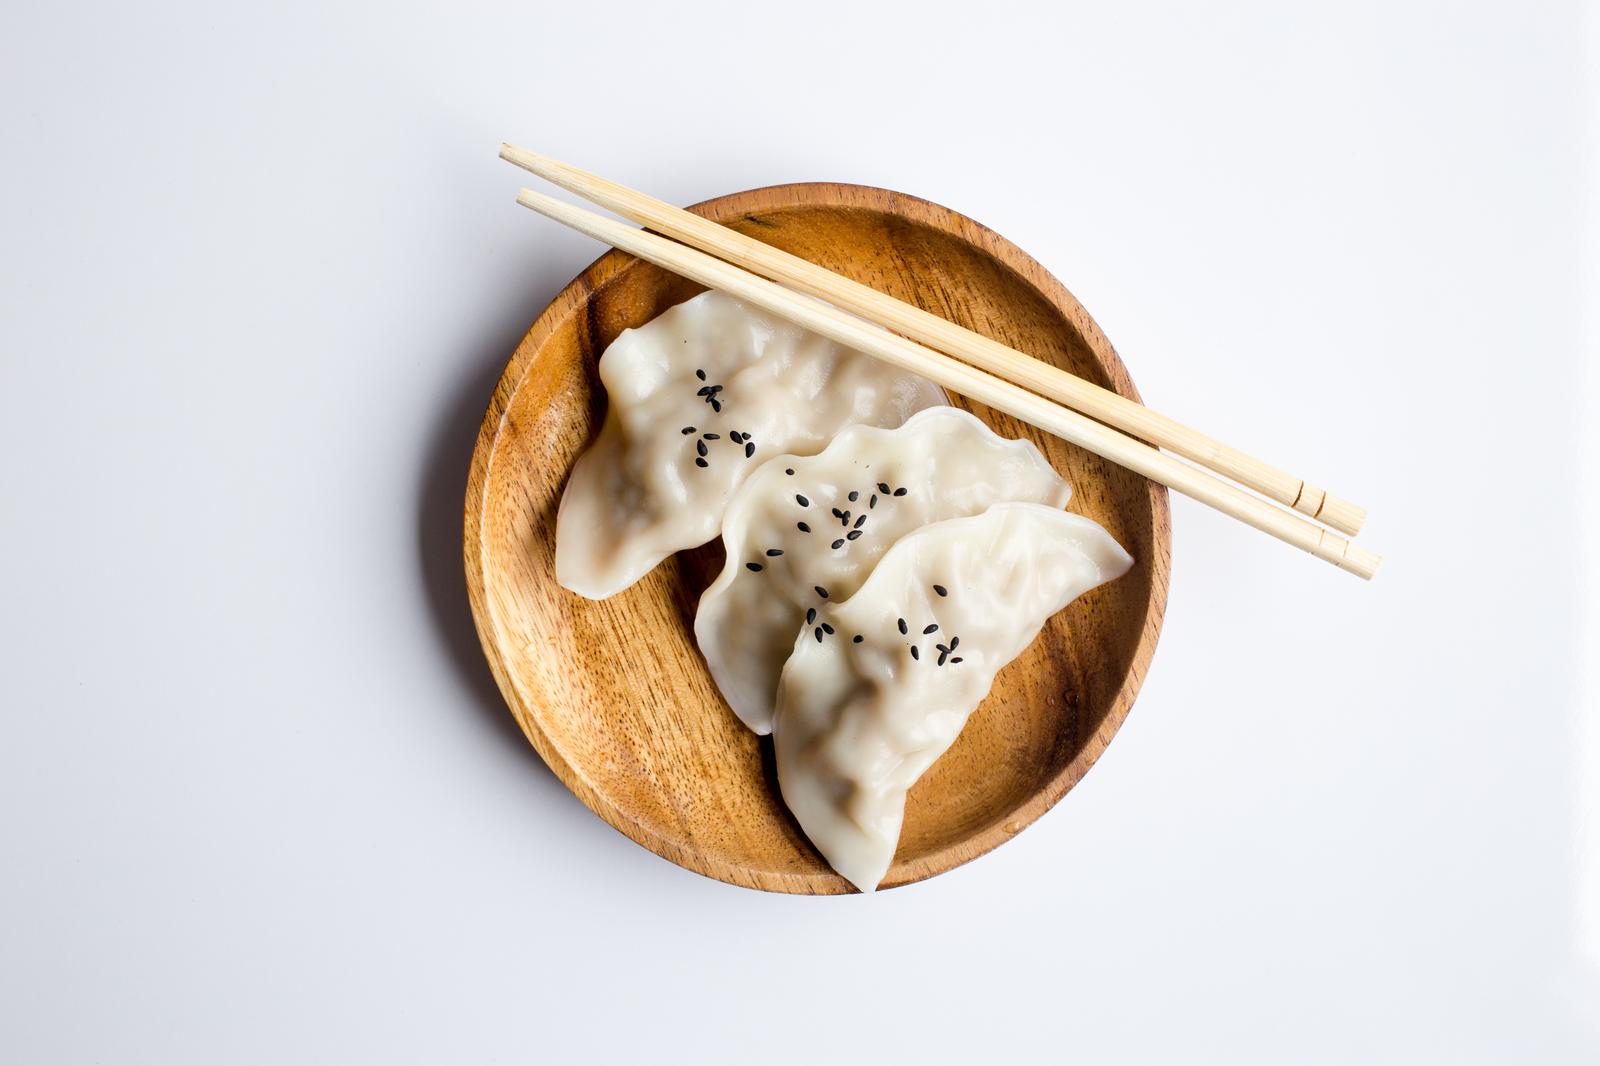 Take a Trip to New York City to Find Out Where You’ll Meet Your Soulmate Dumplings